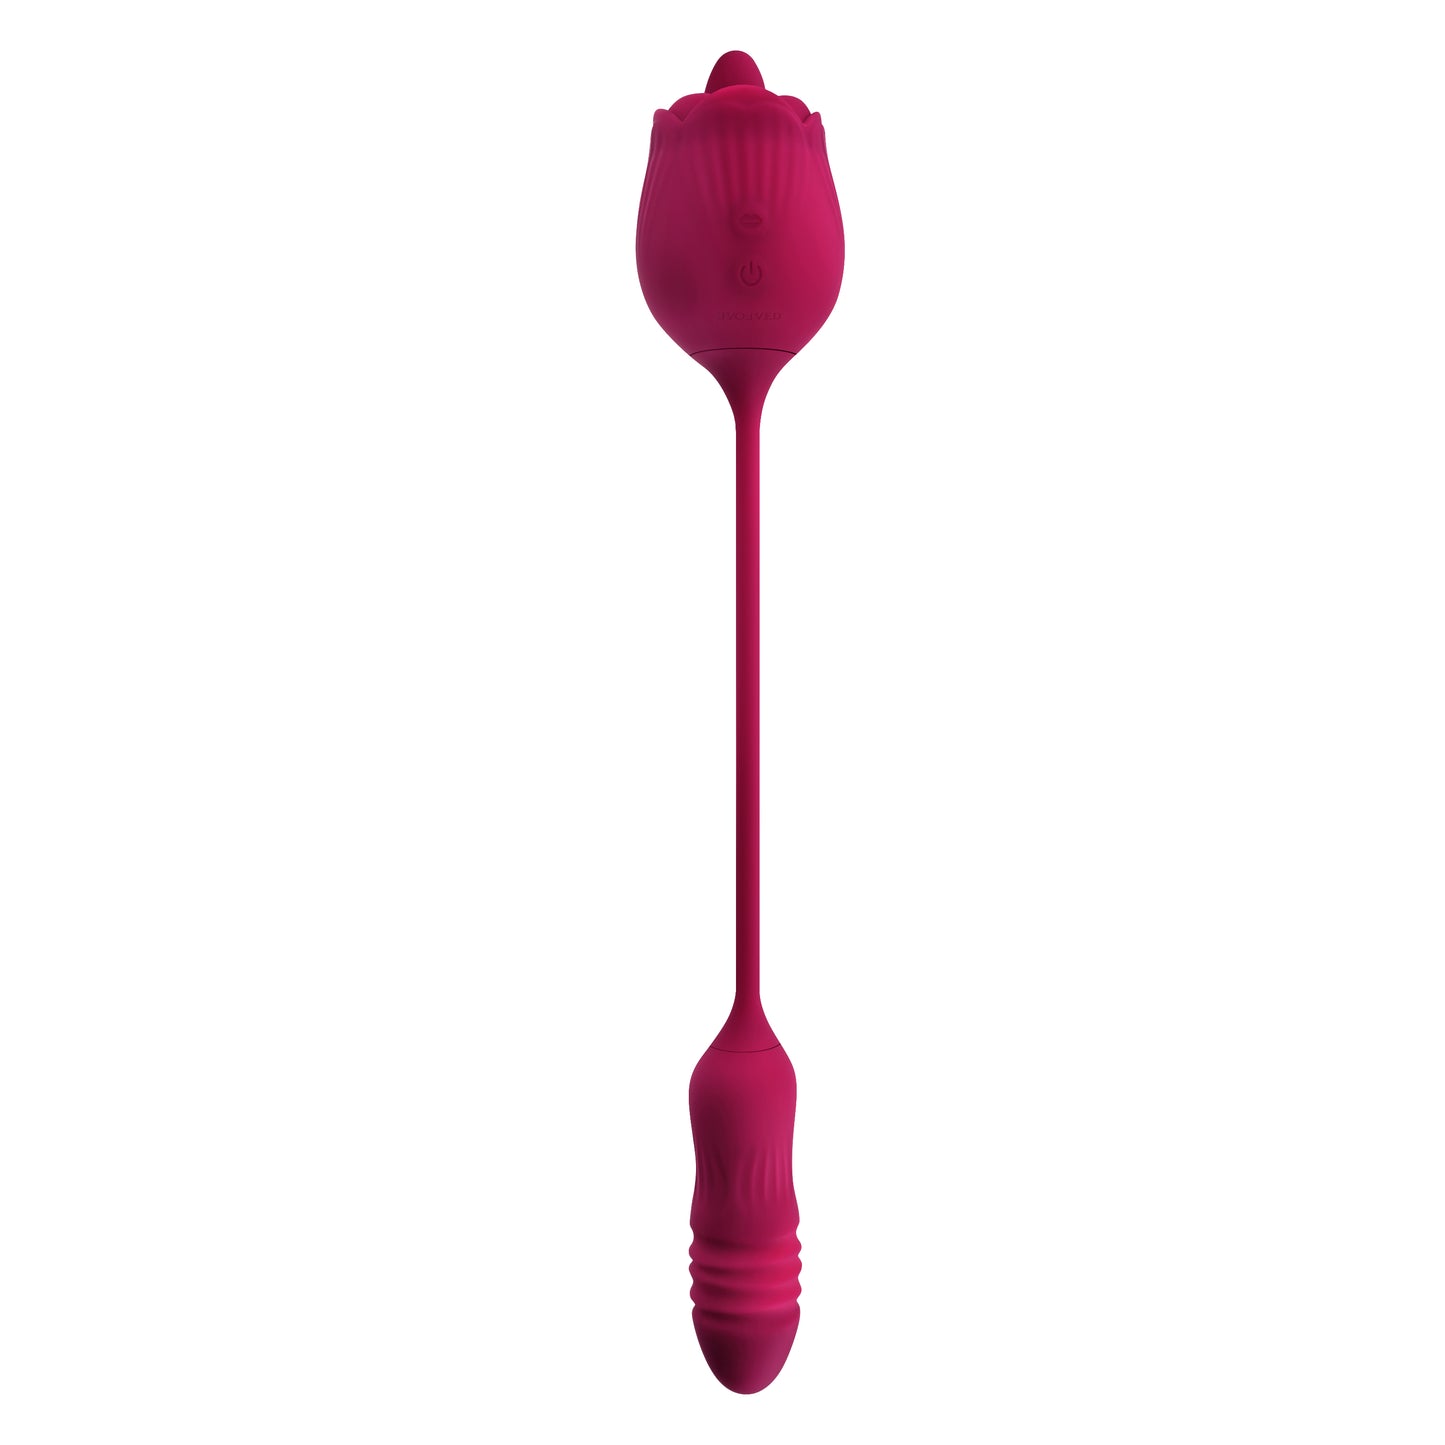 Image shows the full length of the cord of the Wild Rose Rechargeable Silicone Clitoral Stimulator from Evolved.